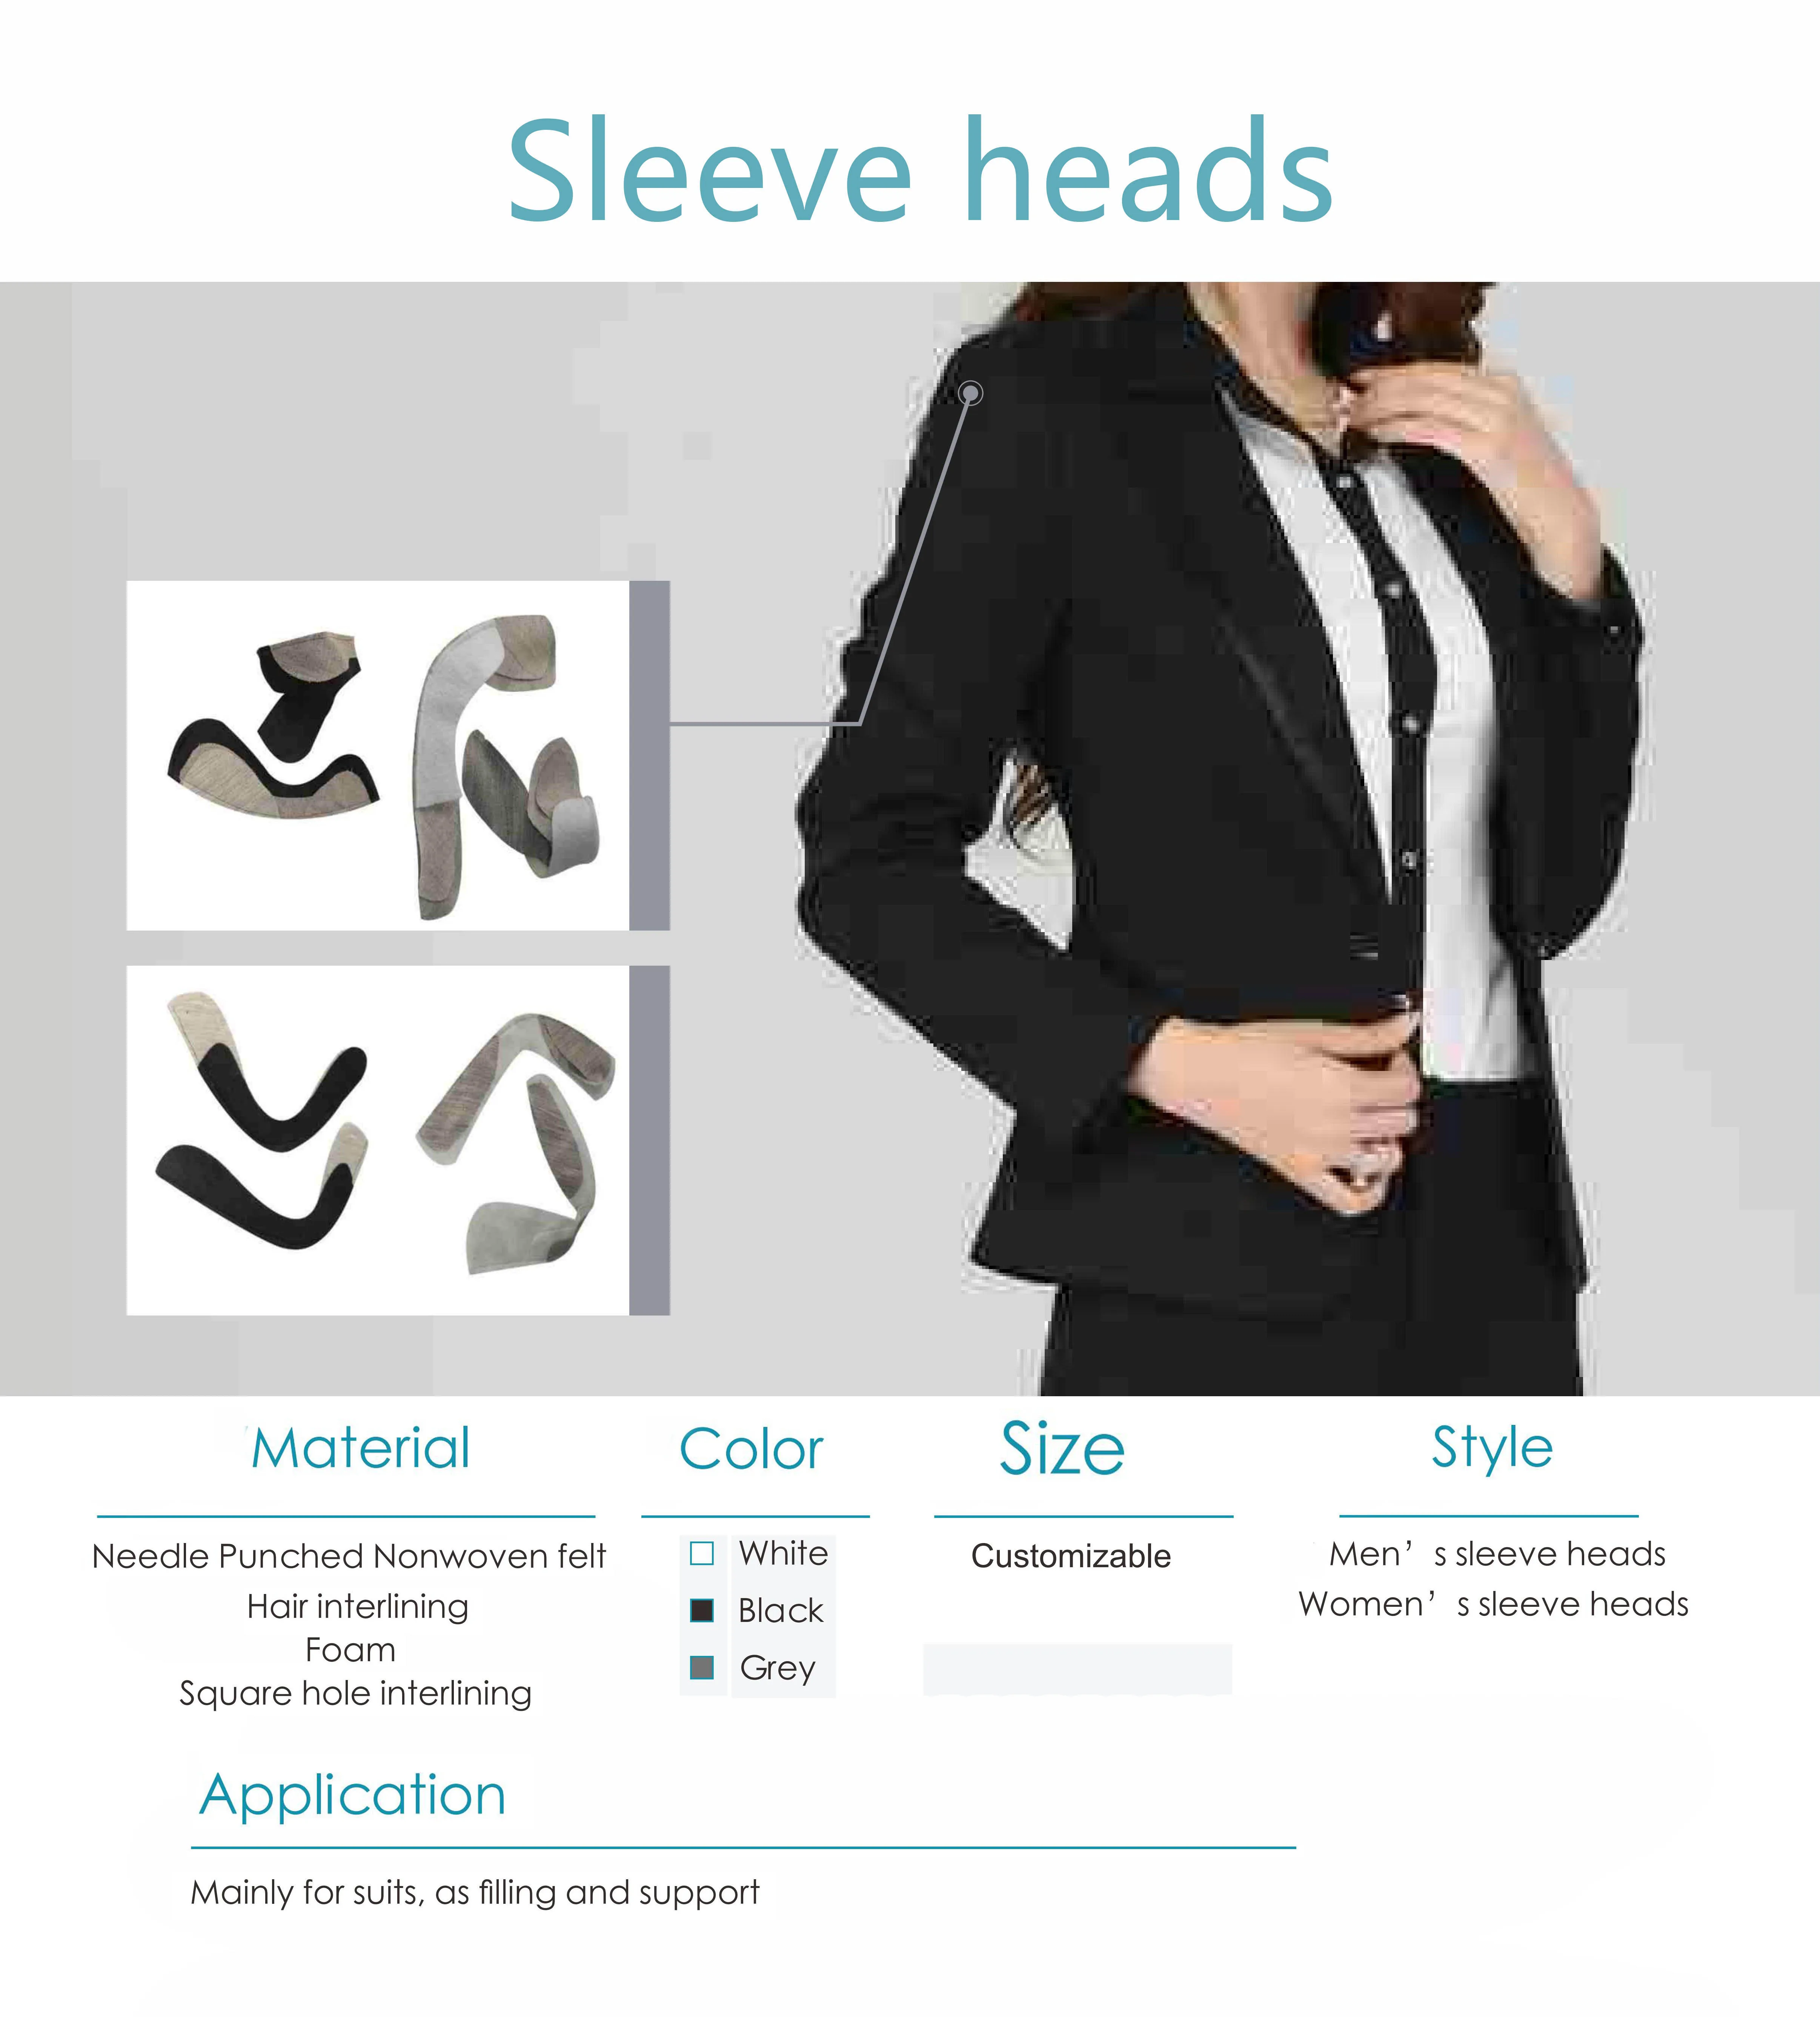 Sleeve Head Roll for Suits Shoulder Support Customize size